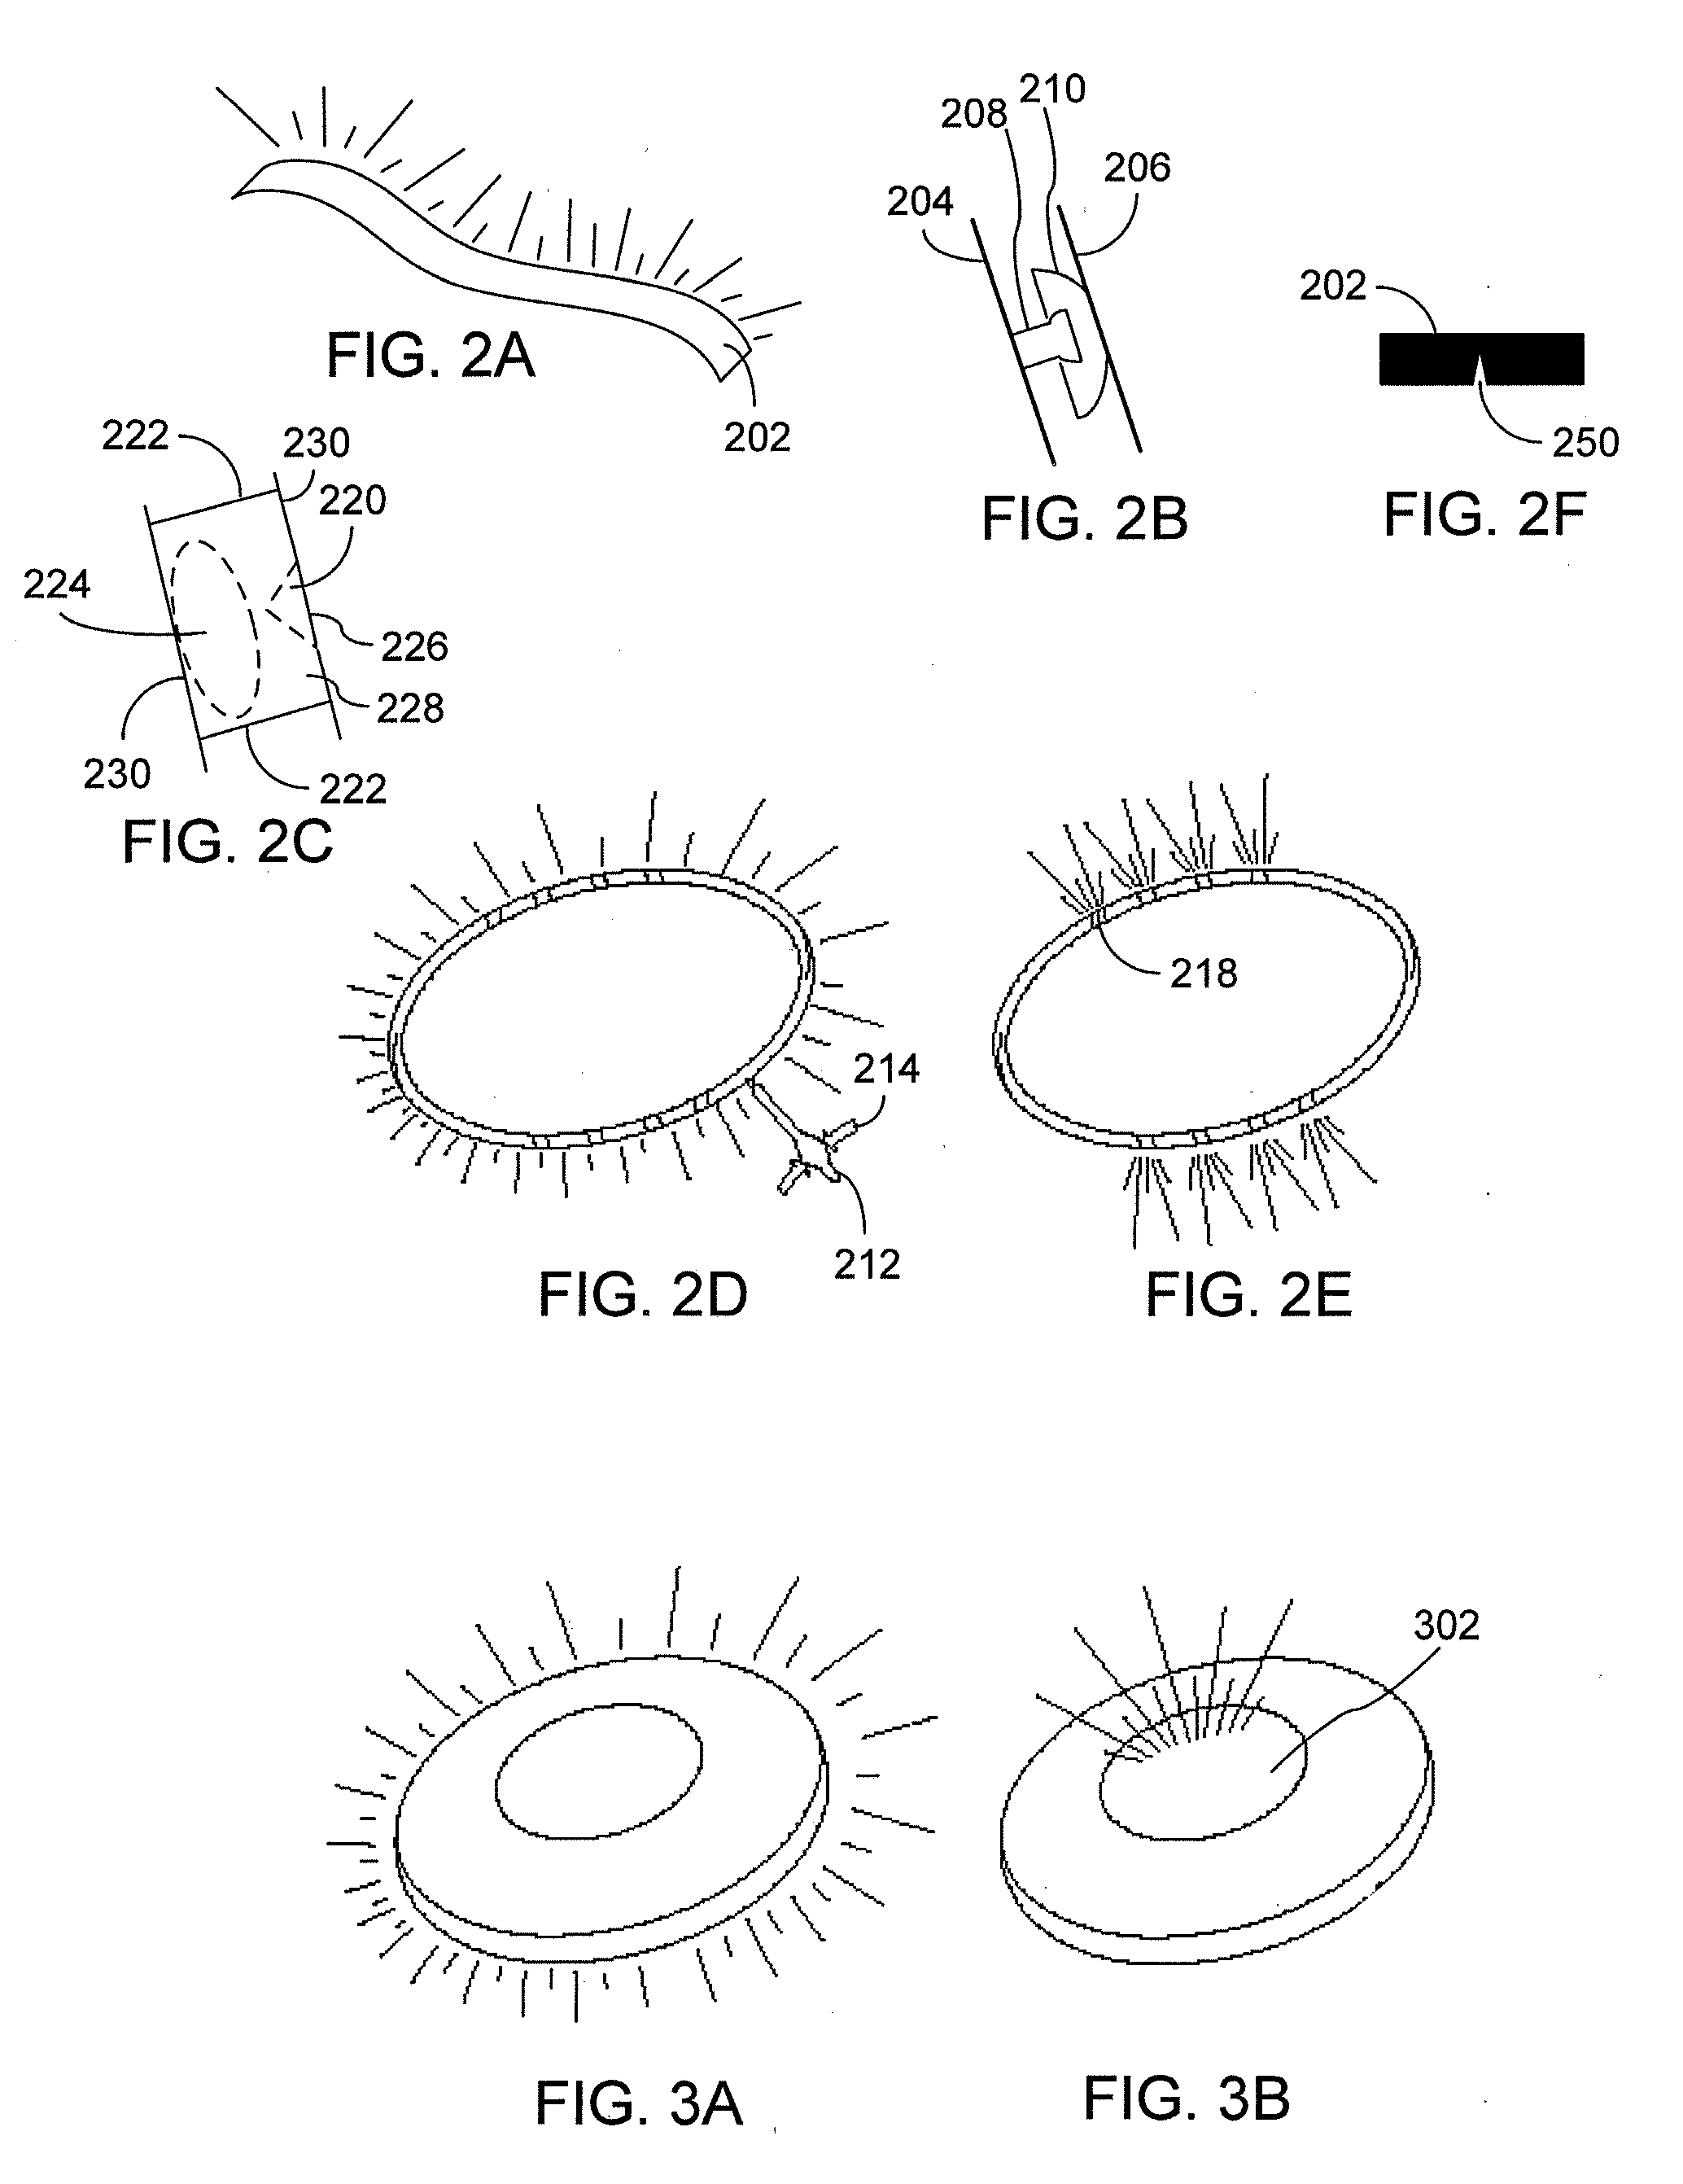 Method and apparatus for self-illuminating sports, entertainment, emergency, and safety devices